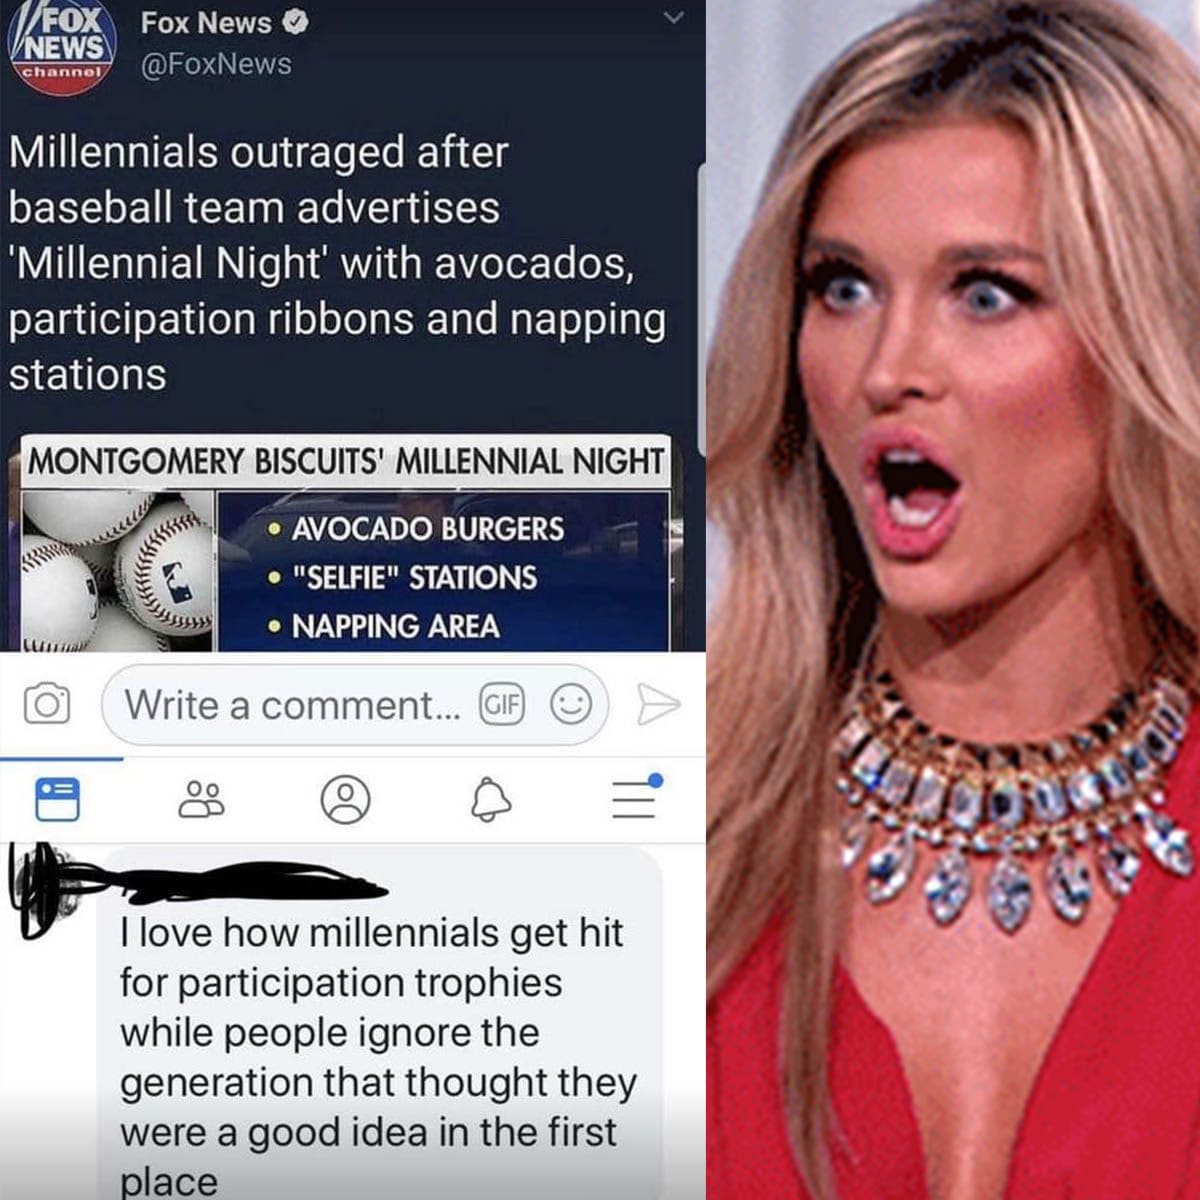 brutal comments and comebacks - jaw - Fox Fox News News channel Millennials outraged after baseball team advertises 'Millennial Night' with avocados, participation ribbons and napping stations Montgomery Biscuits' Millennial Night Avocado Burgers